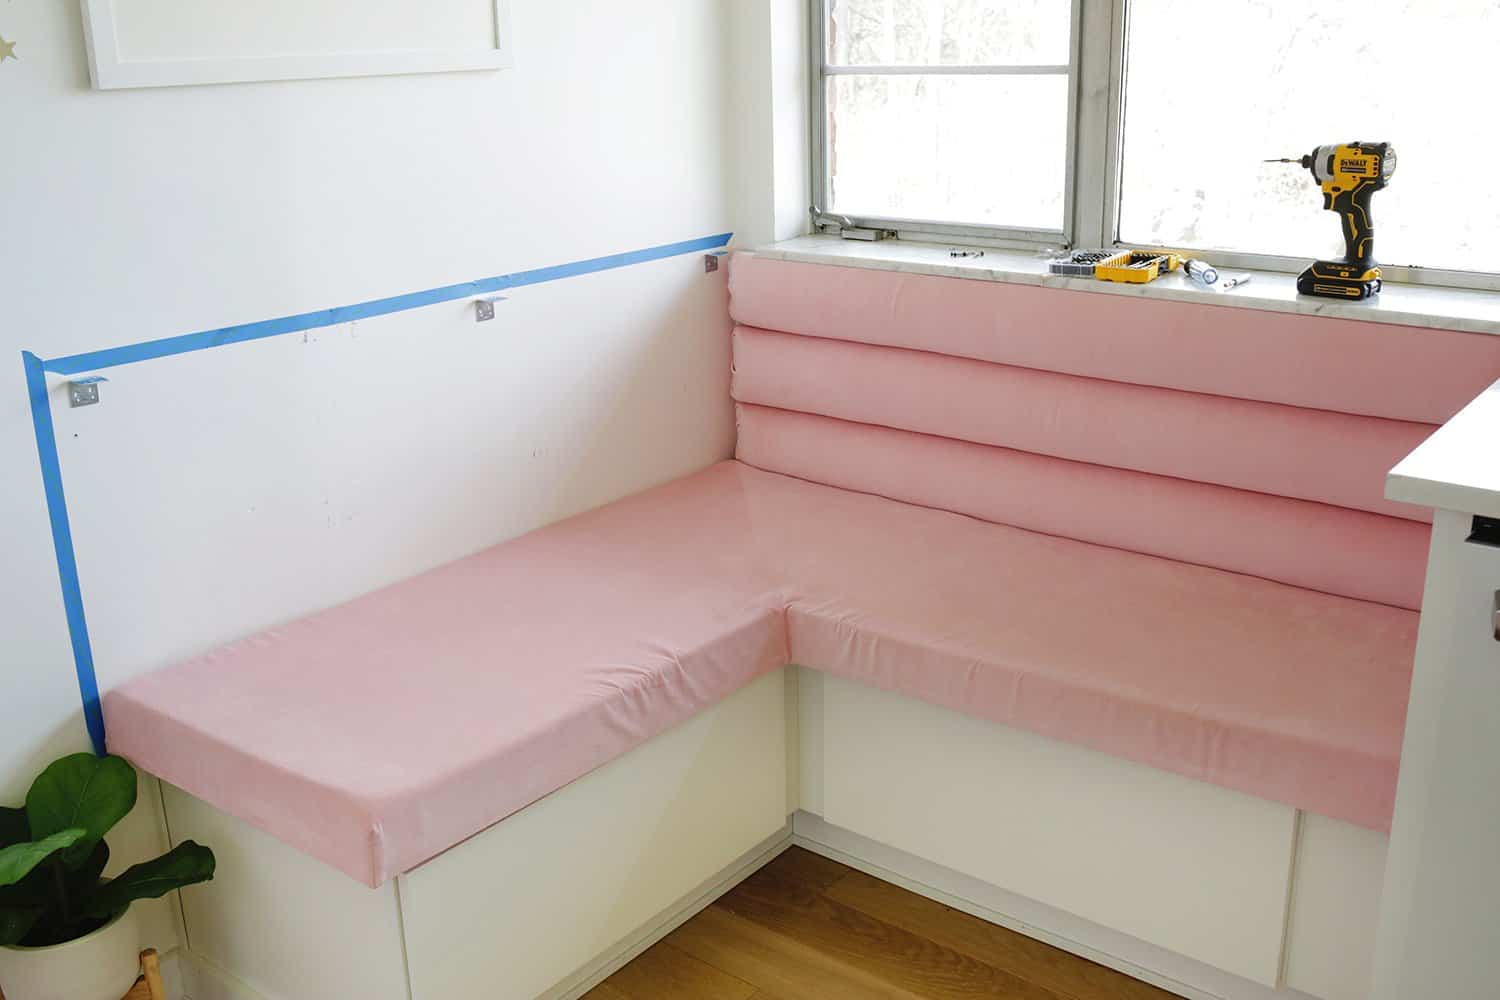 half the banquette backing attached